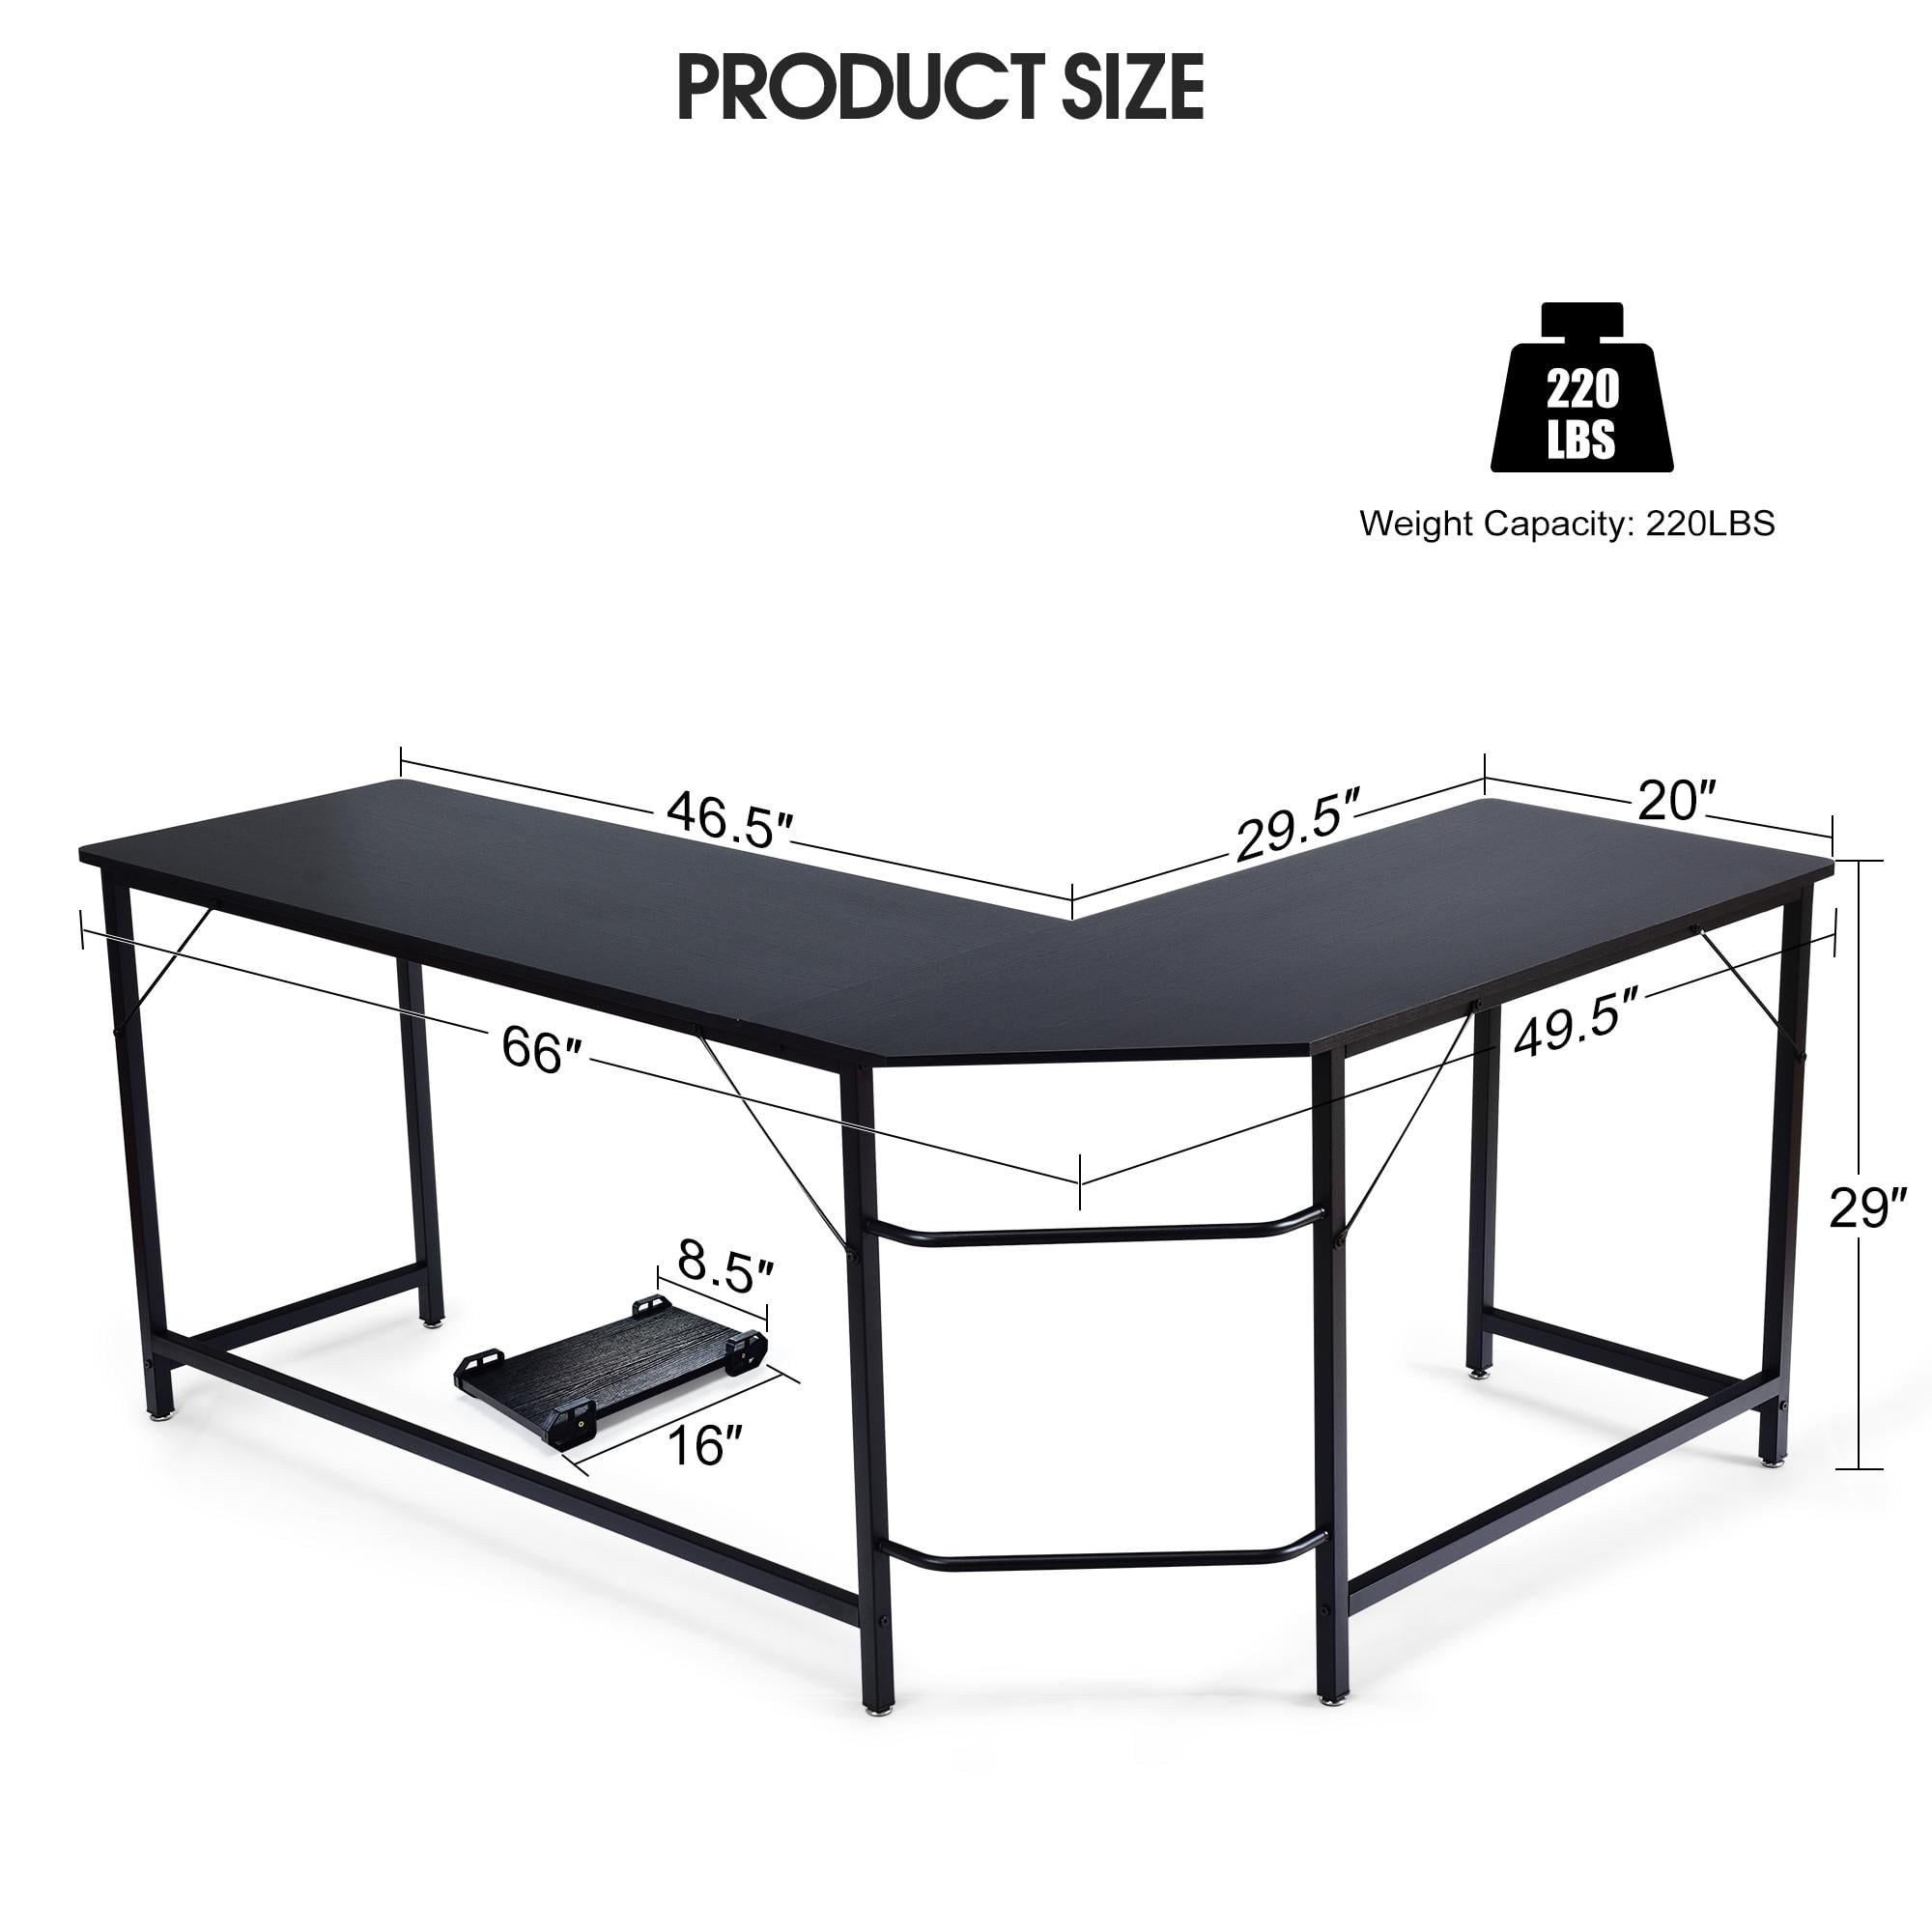 Eyerson L-Shape Gaming Desk with Built in Outlets 17 Stories Size: 33.30 H x 63 W x 31.50 D, Color (Top/Frame): Brown/Black